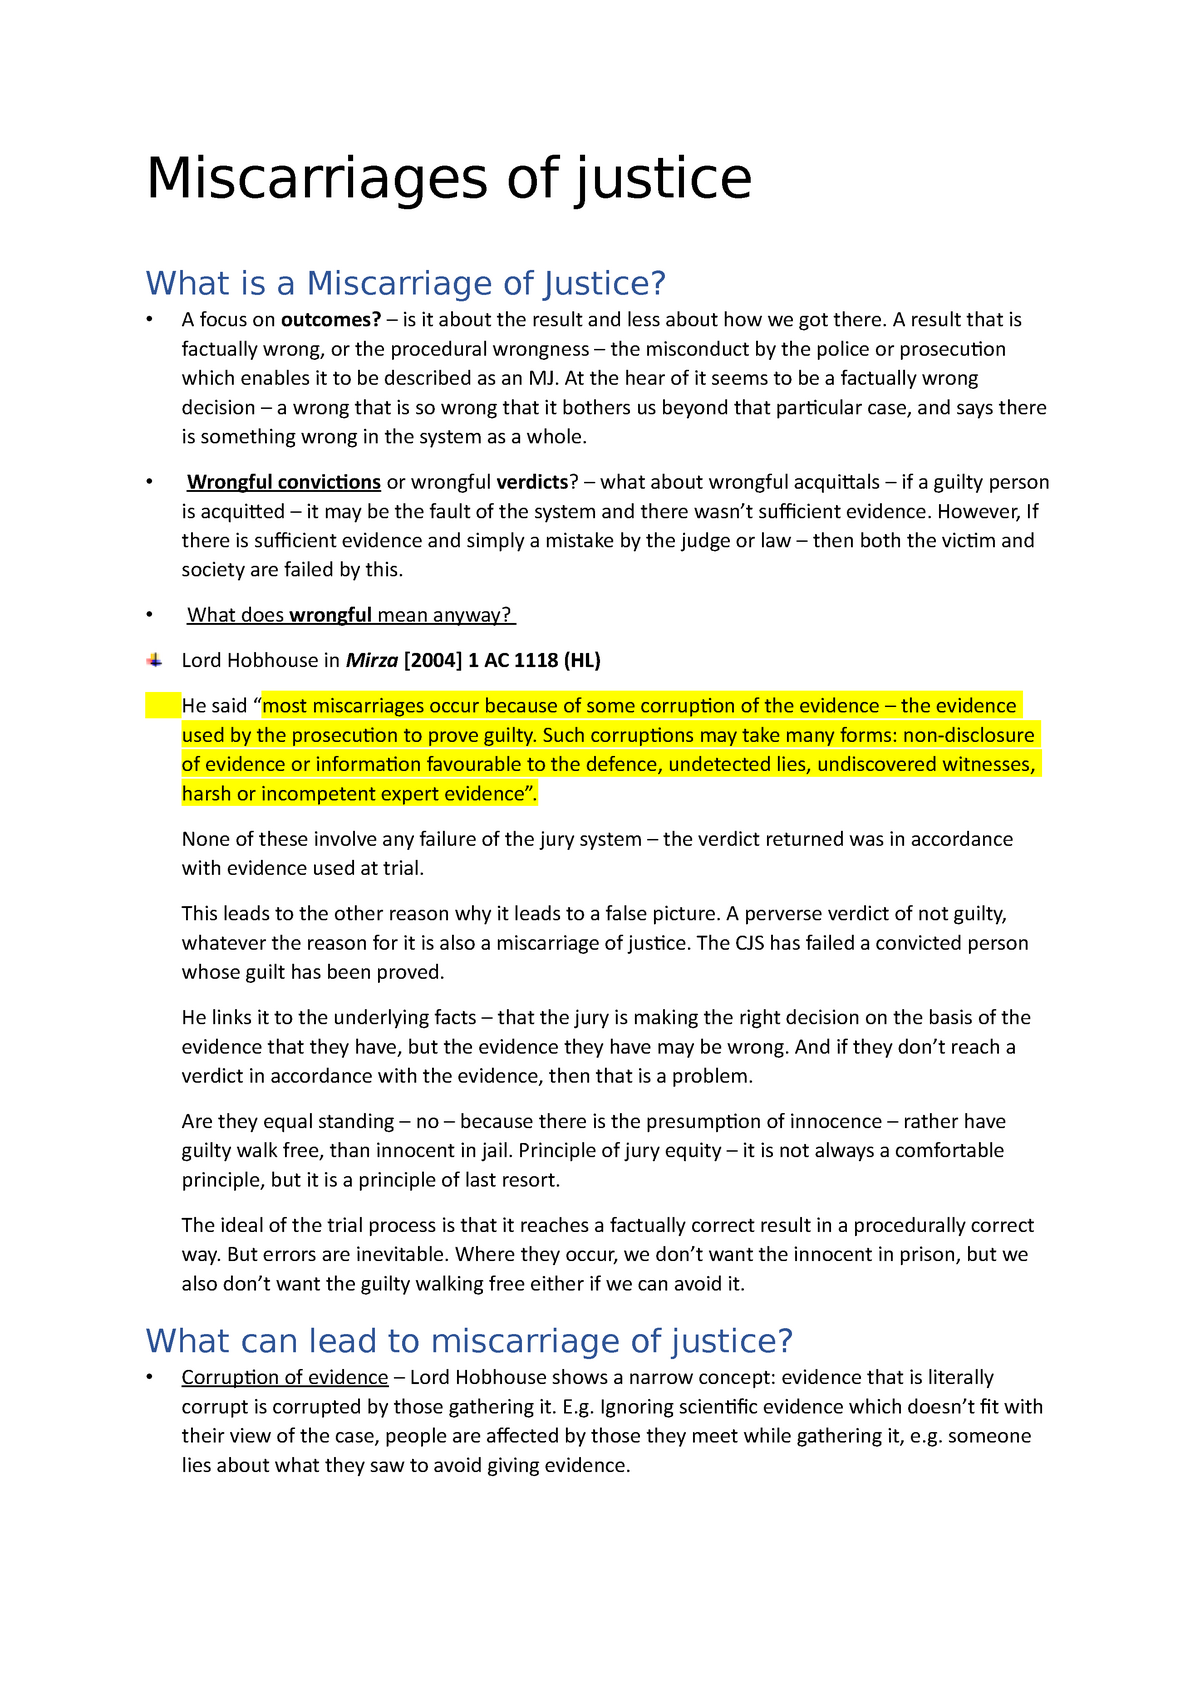 what is a miscarriage of justice essay